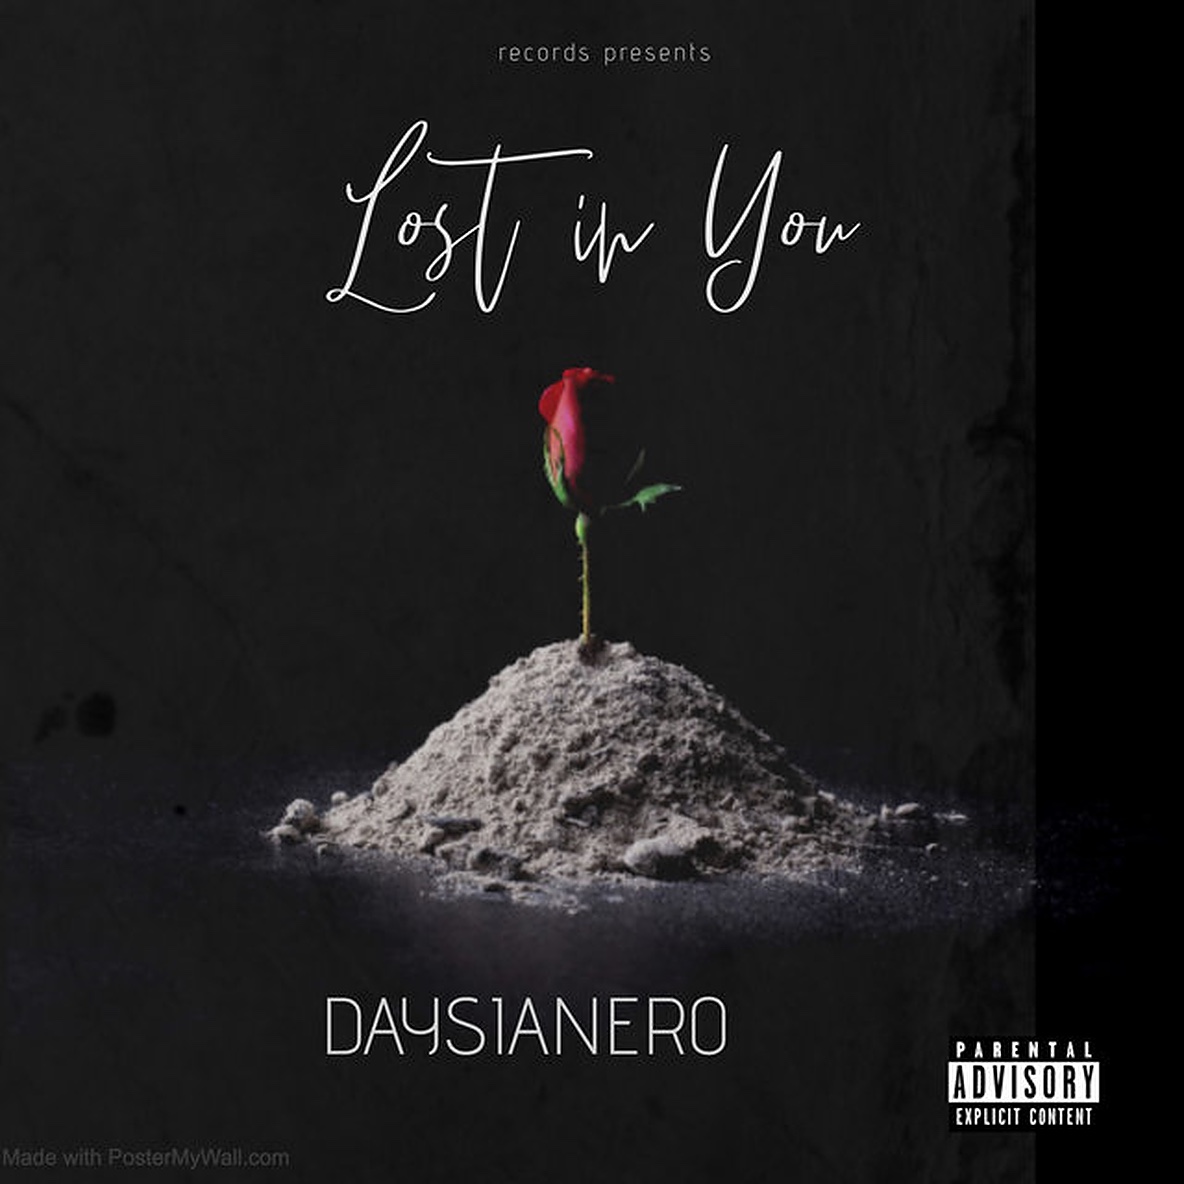 Daysianero’s latest single “Lost in You” now streaming across all digital platforms